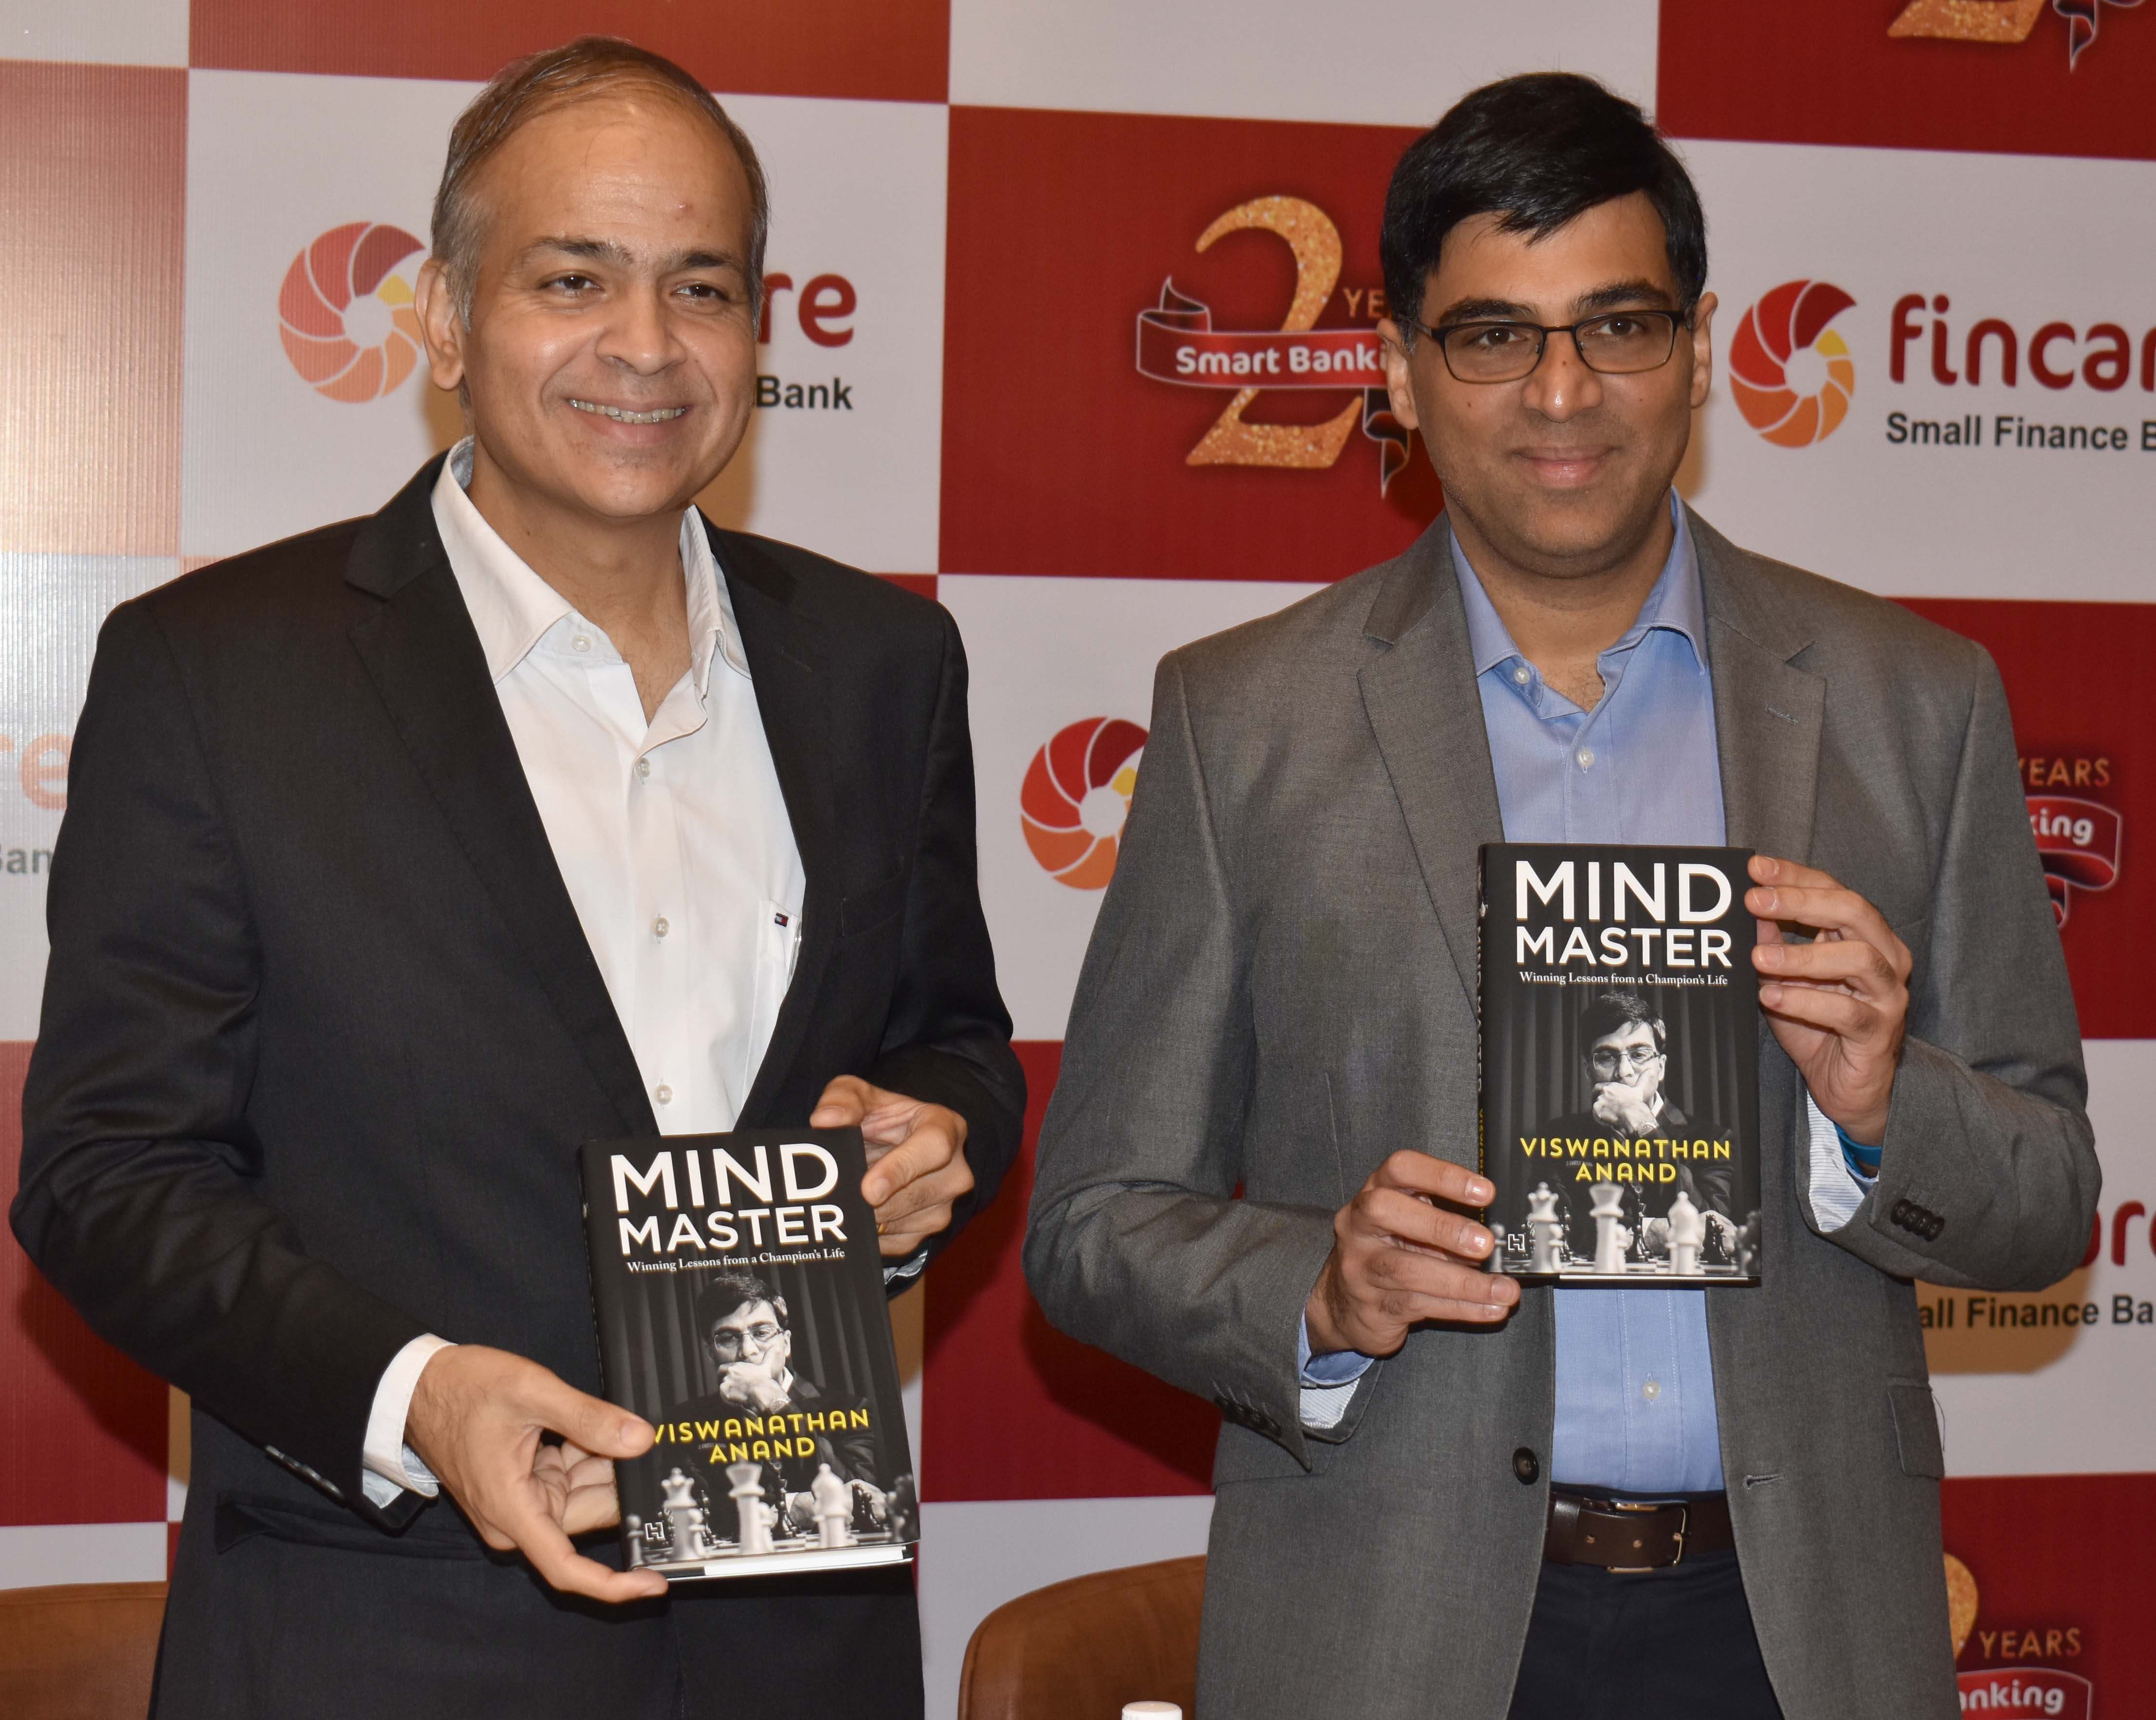 Mumbai: Chess Grandmaster Viswanathan Anand releases his autobiography Mind Master with Rajeev Yadav, MD and CEO of Fincare Small Finance Bank Ltd and announcement the  Fincare Small Finance Bank achieved Business in Mumbai on Thursday. Photo By Sachin Murdeshwar GPN/19.12.2019